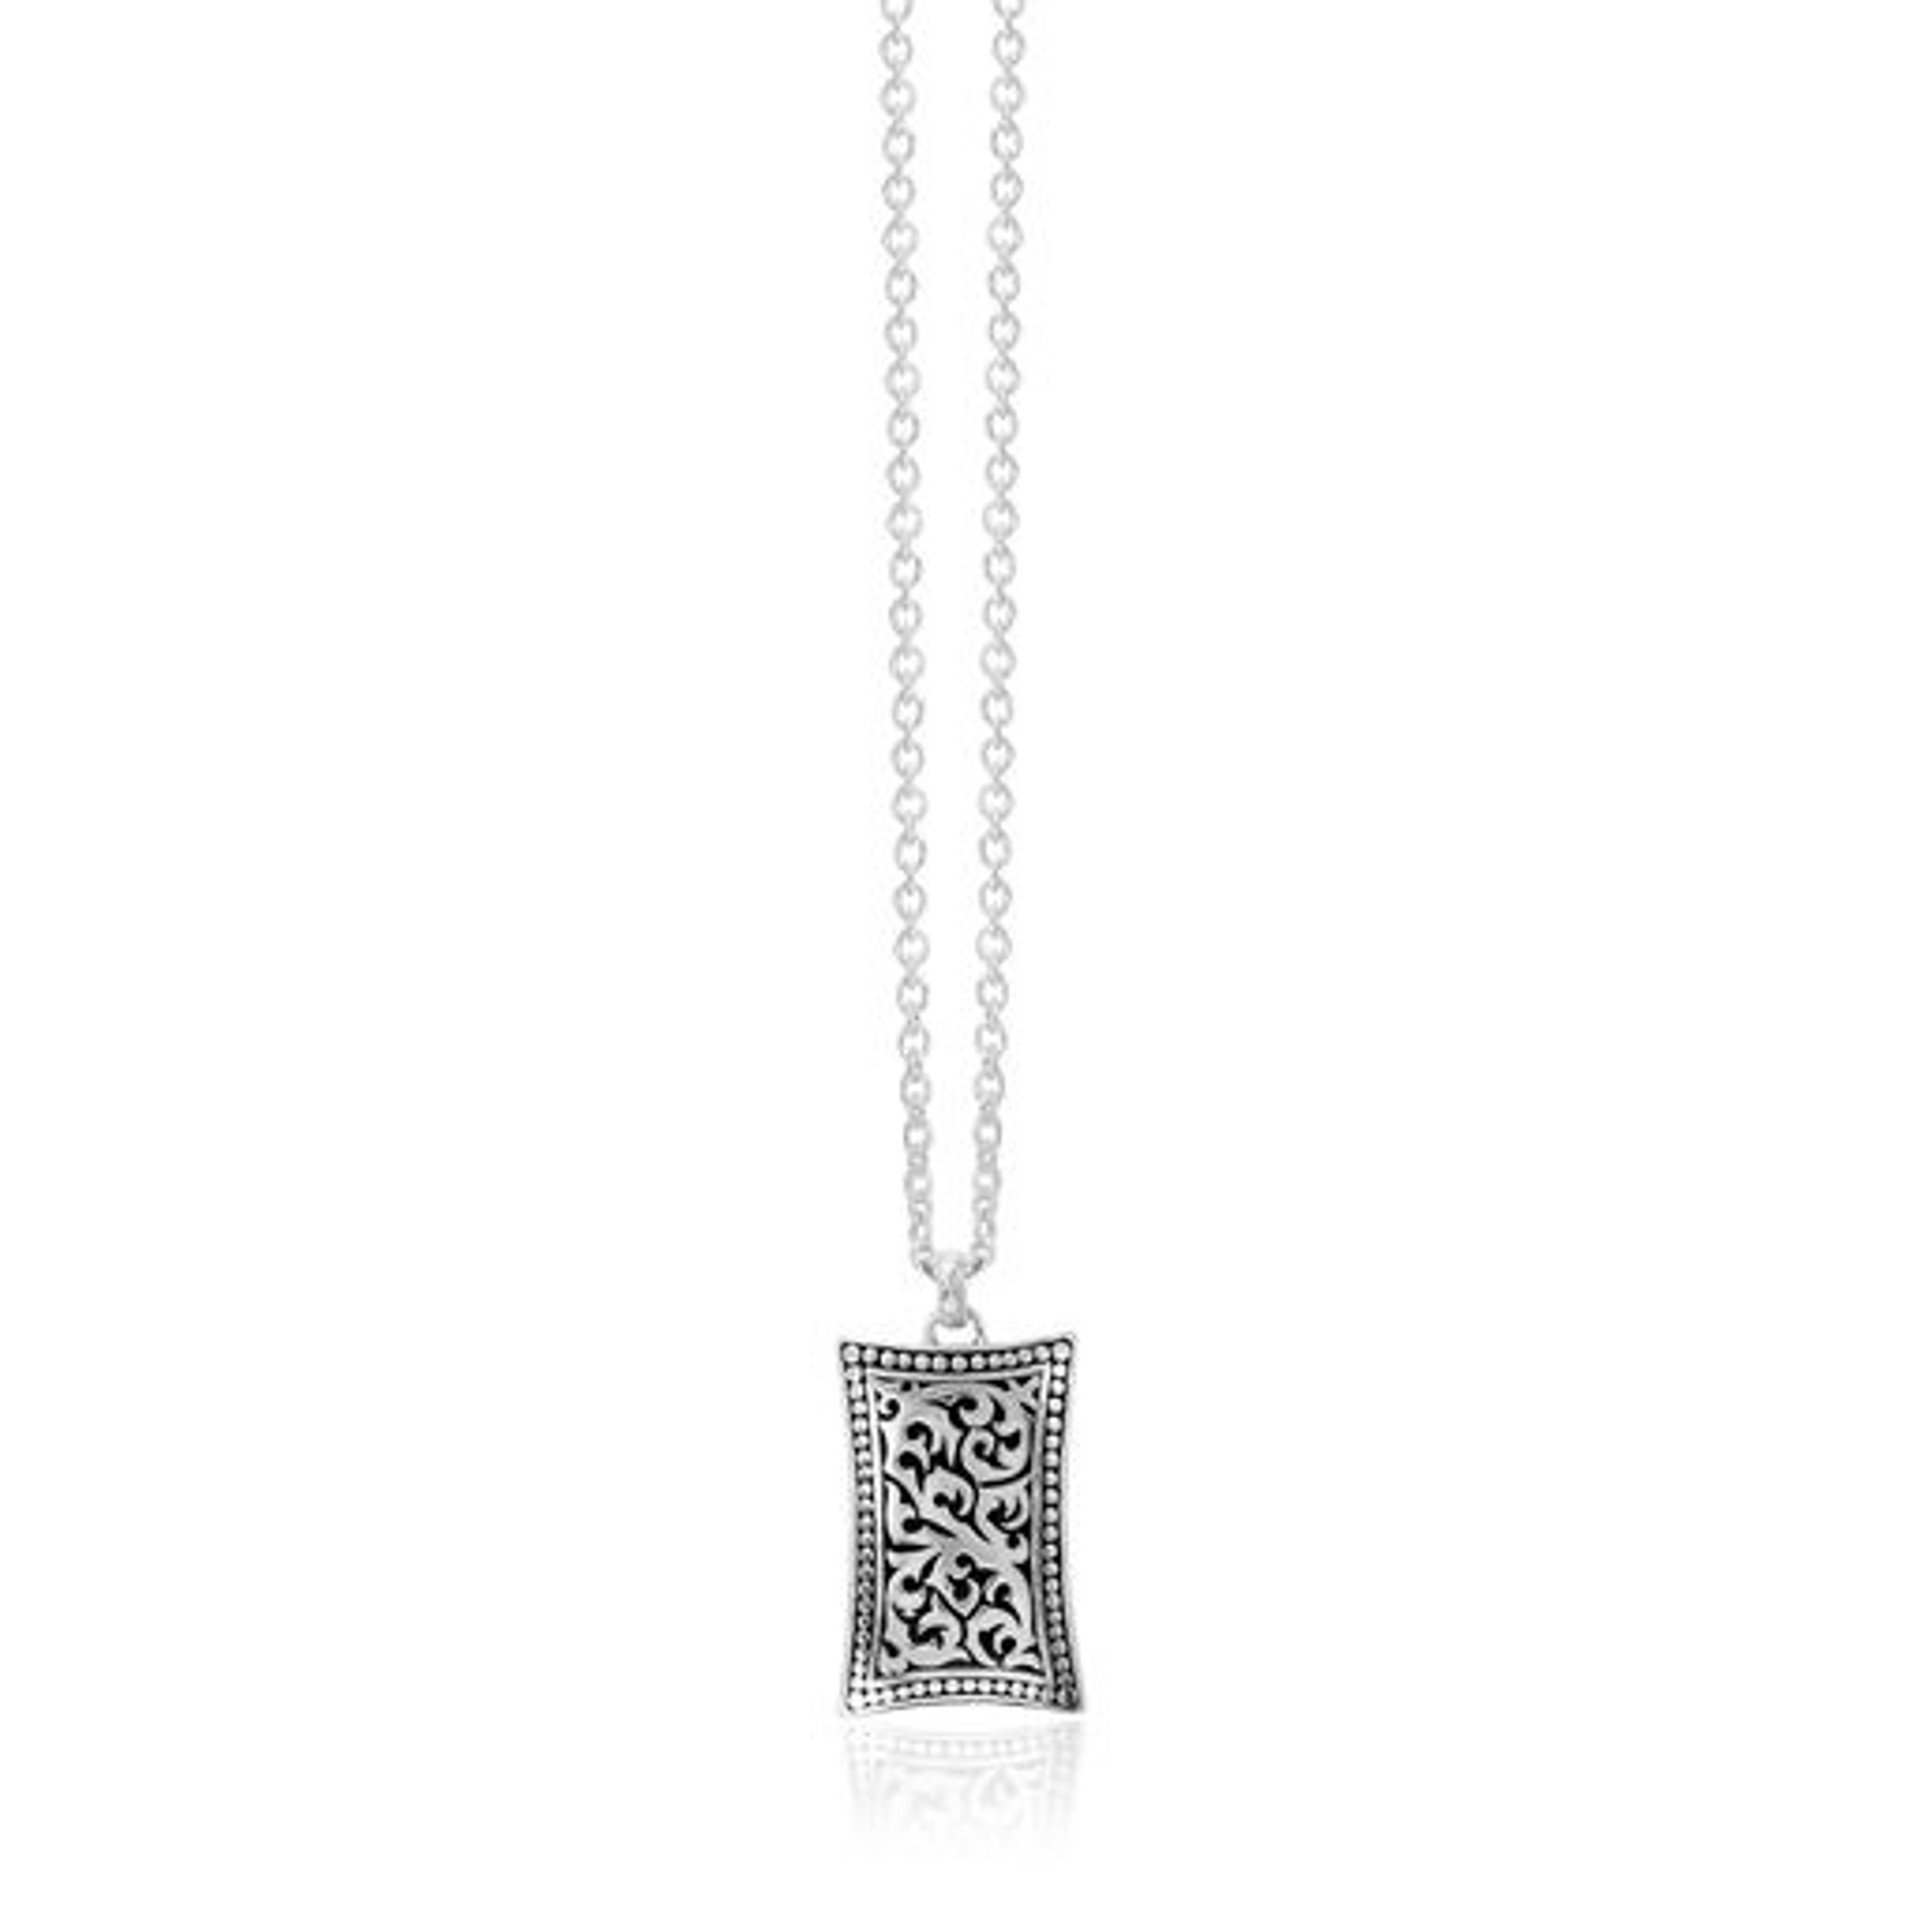 7026 Dog Tag Rectangular Scroll Men's Silver Necklace by Lois Hill